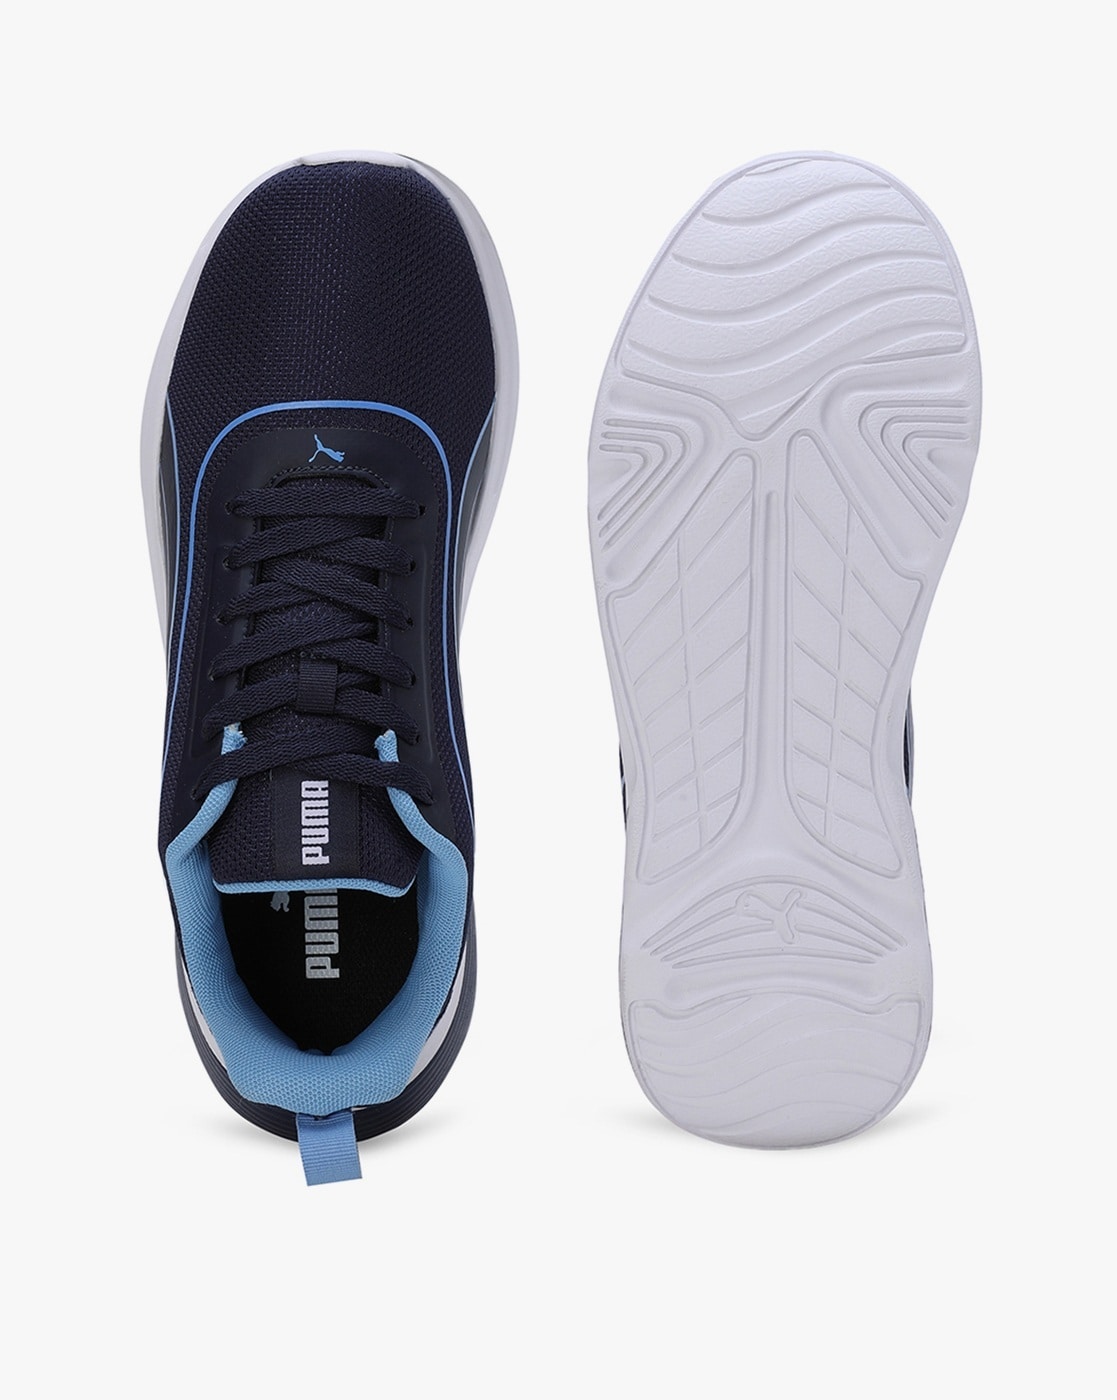 Puma WHT/BLUE SNEAKERS ::PARMAR BOOT HOUSE | Buy Footwear and Accessories  For Men, Women & Kids